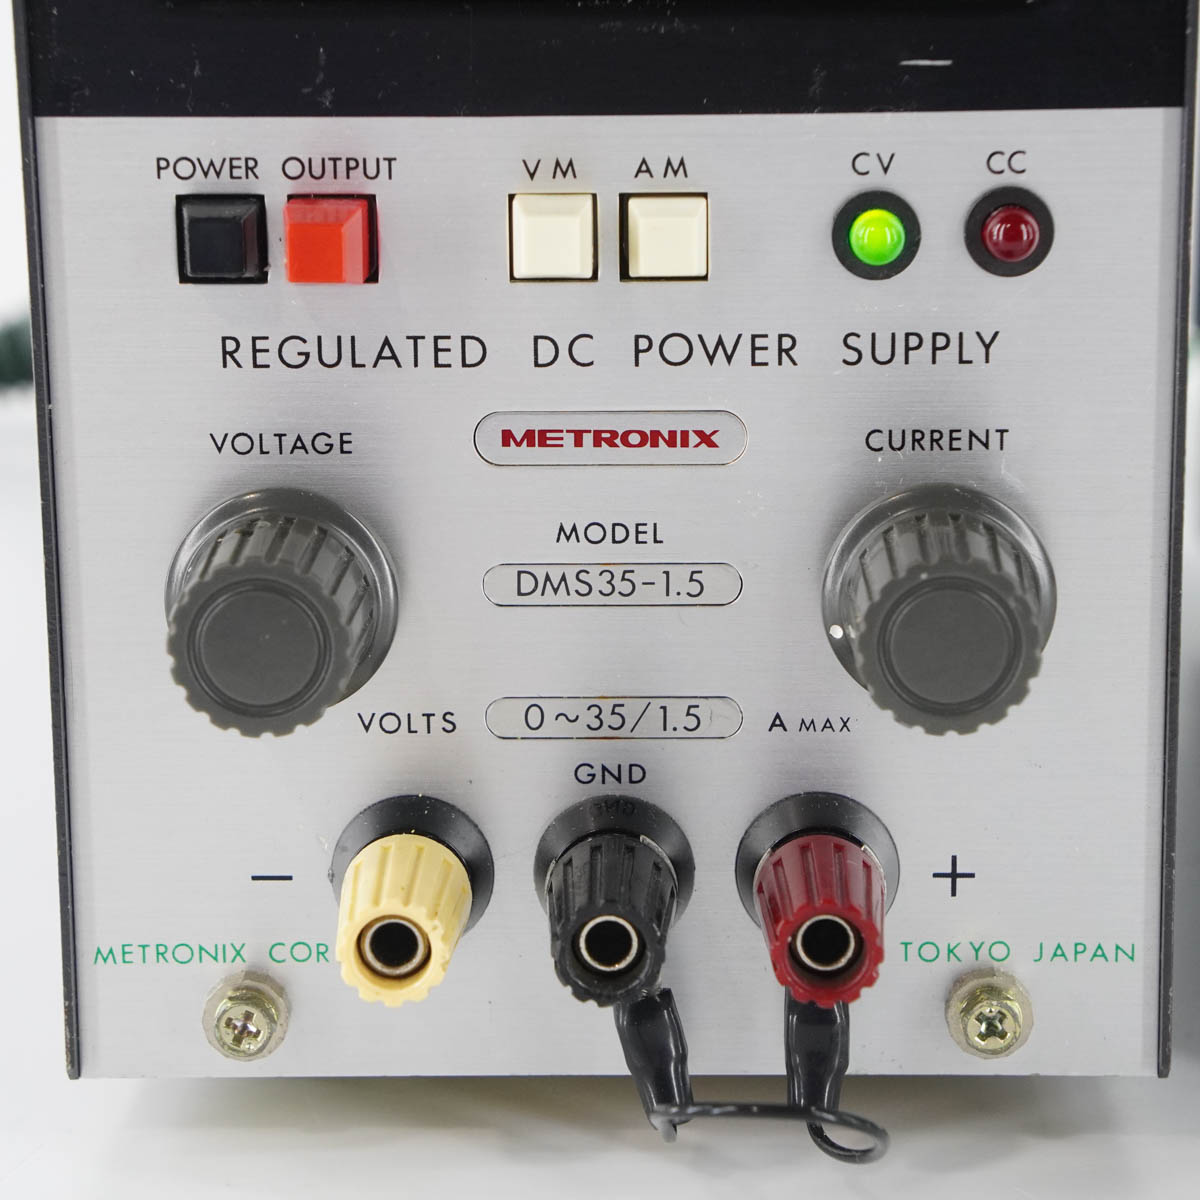 794】METRONIX 4421A 安定課電源 メトロニクス REGULATED DC POWER SUPPLY-